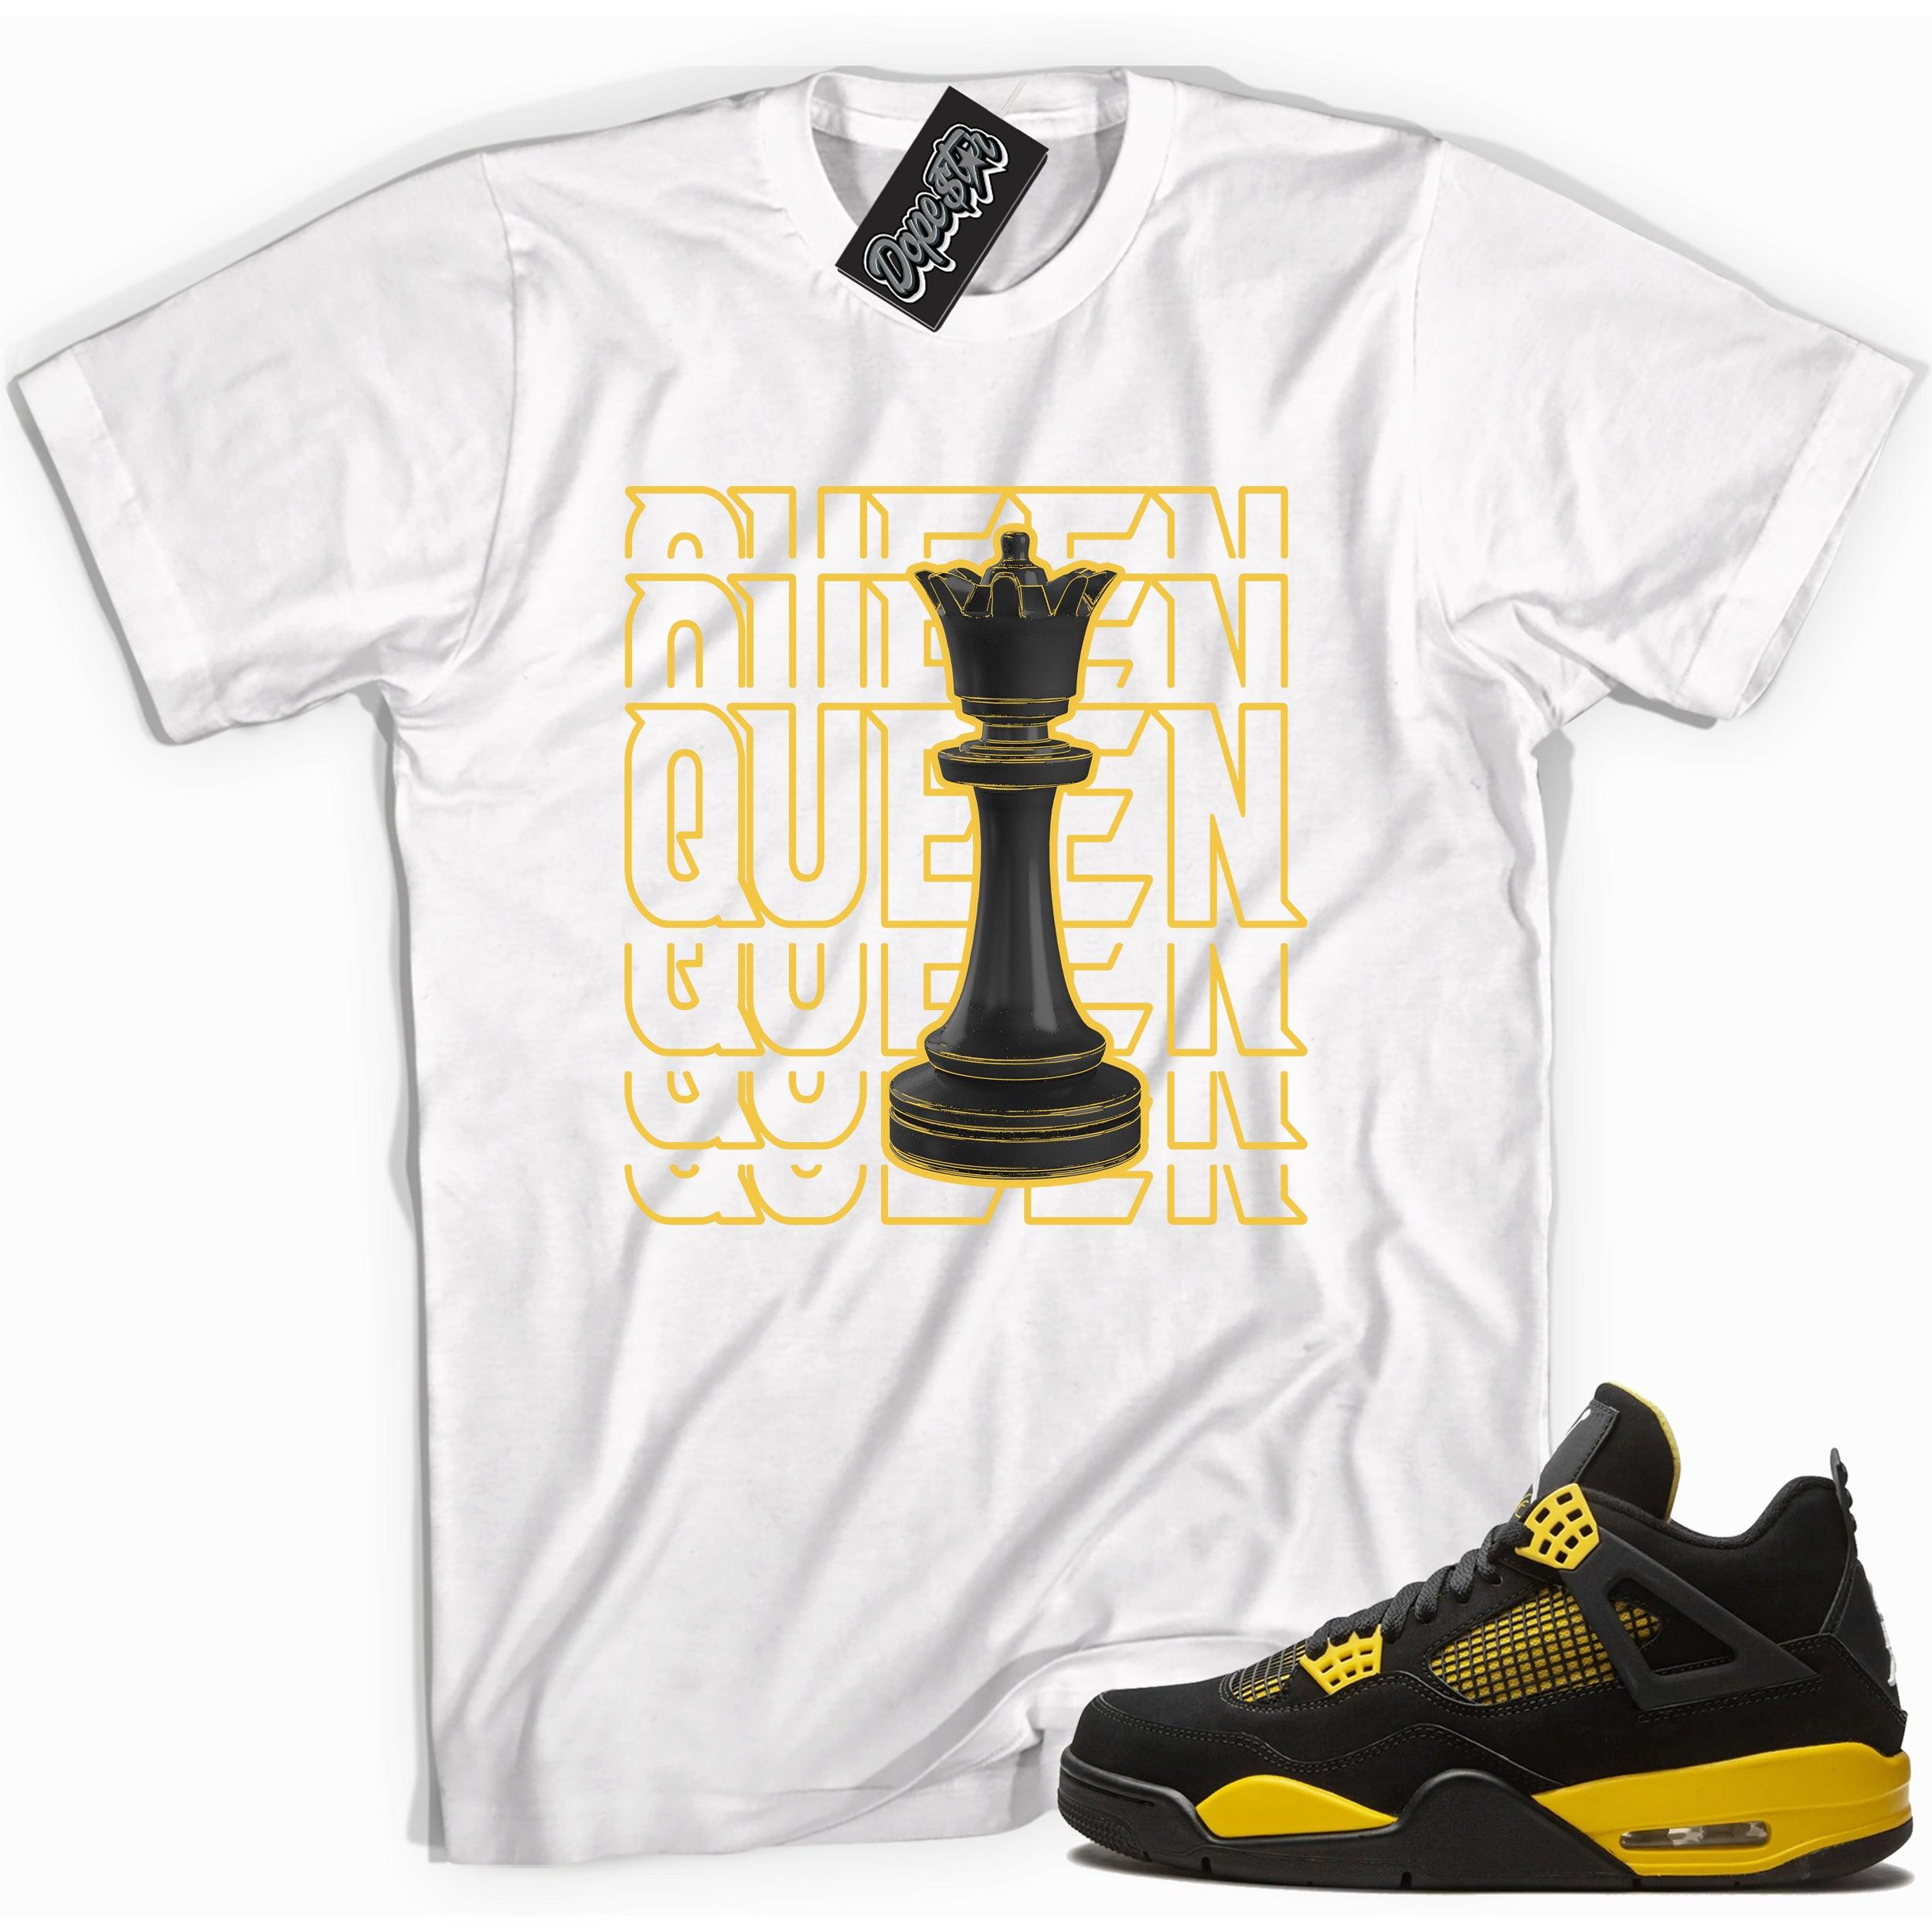 Cool white graphic tee with 'queen' print, that perfectly matches Air Jordan 4 Thunder sneakers